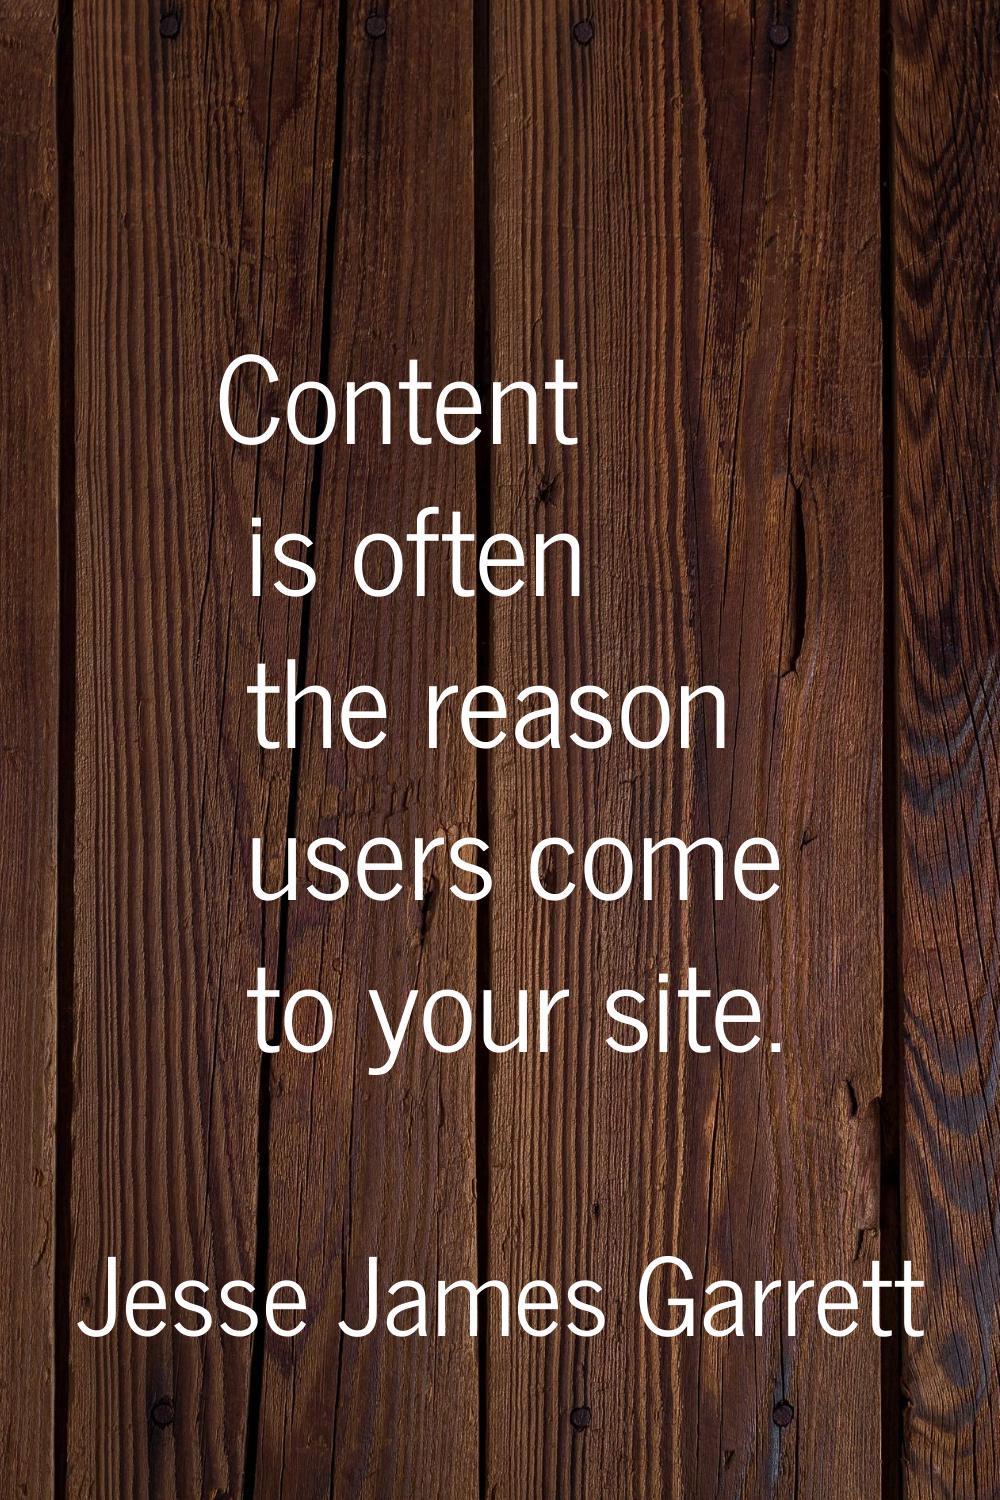 Content is often the reason users come to your site.